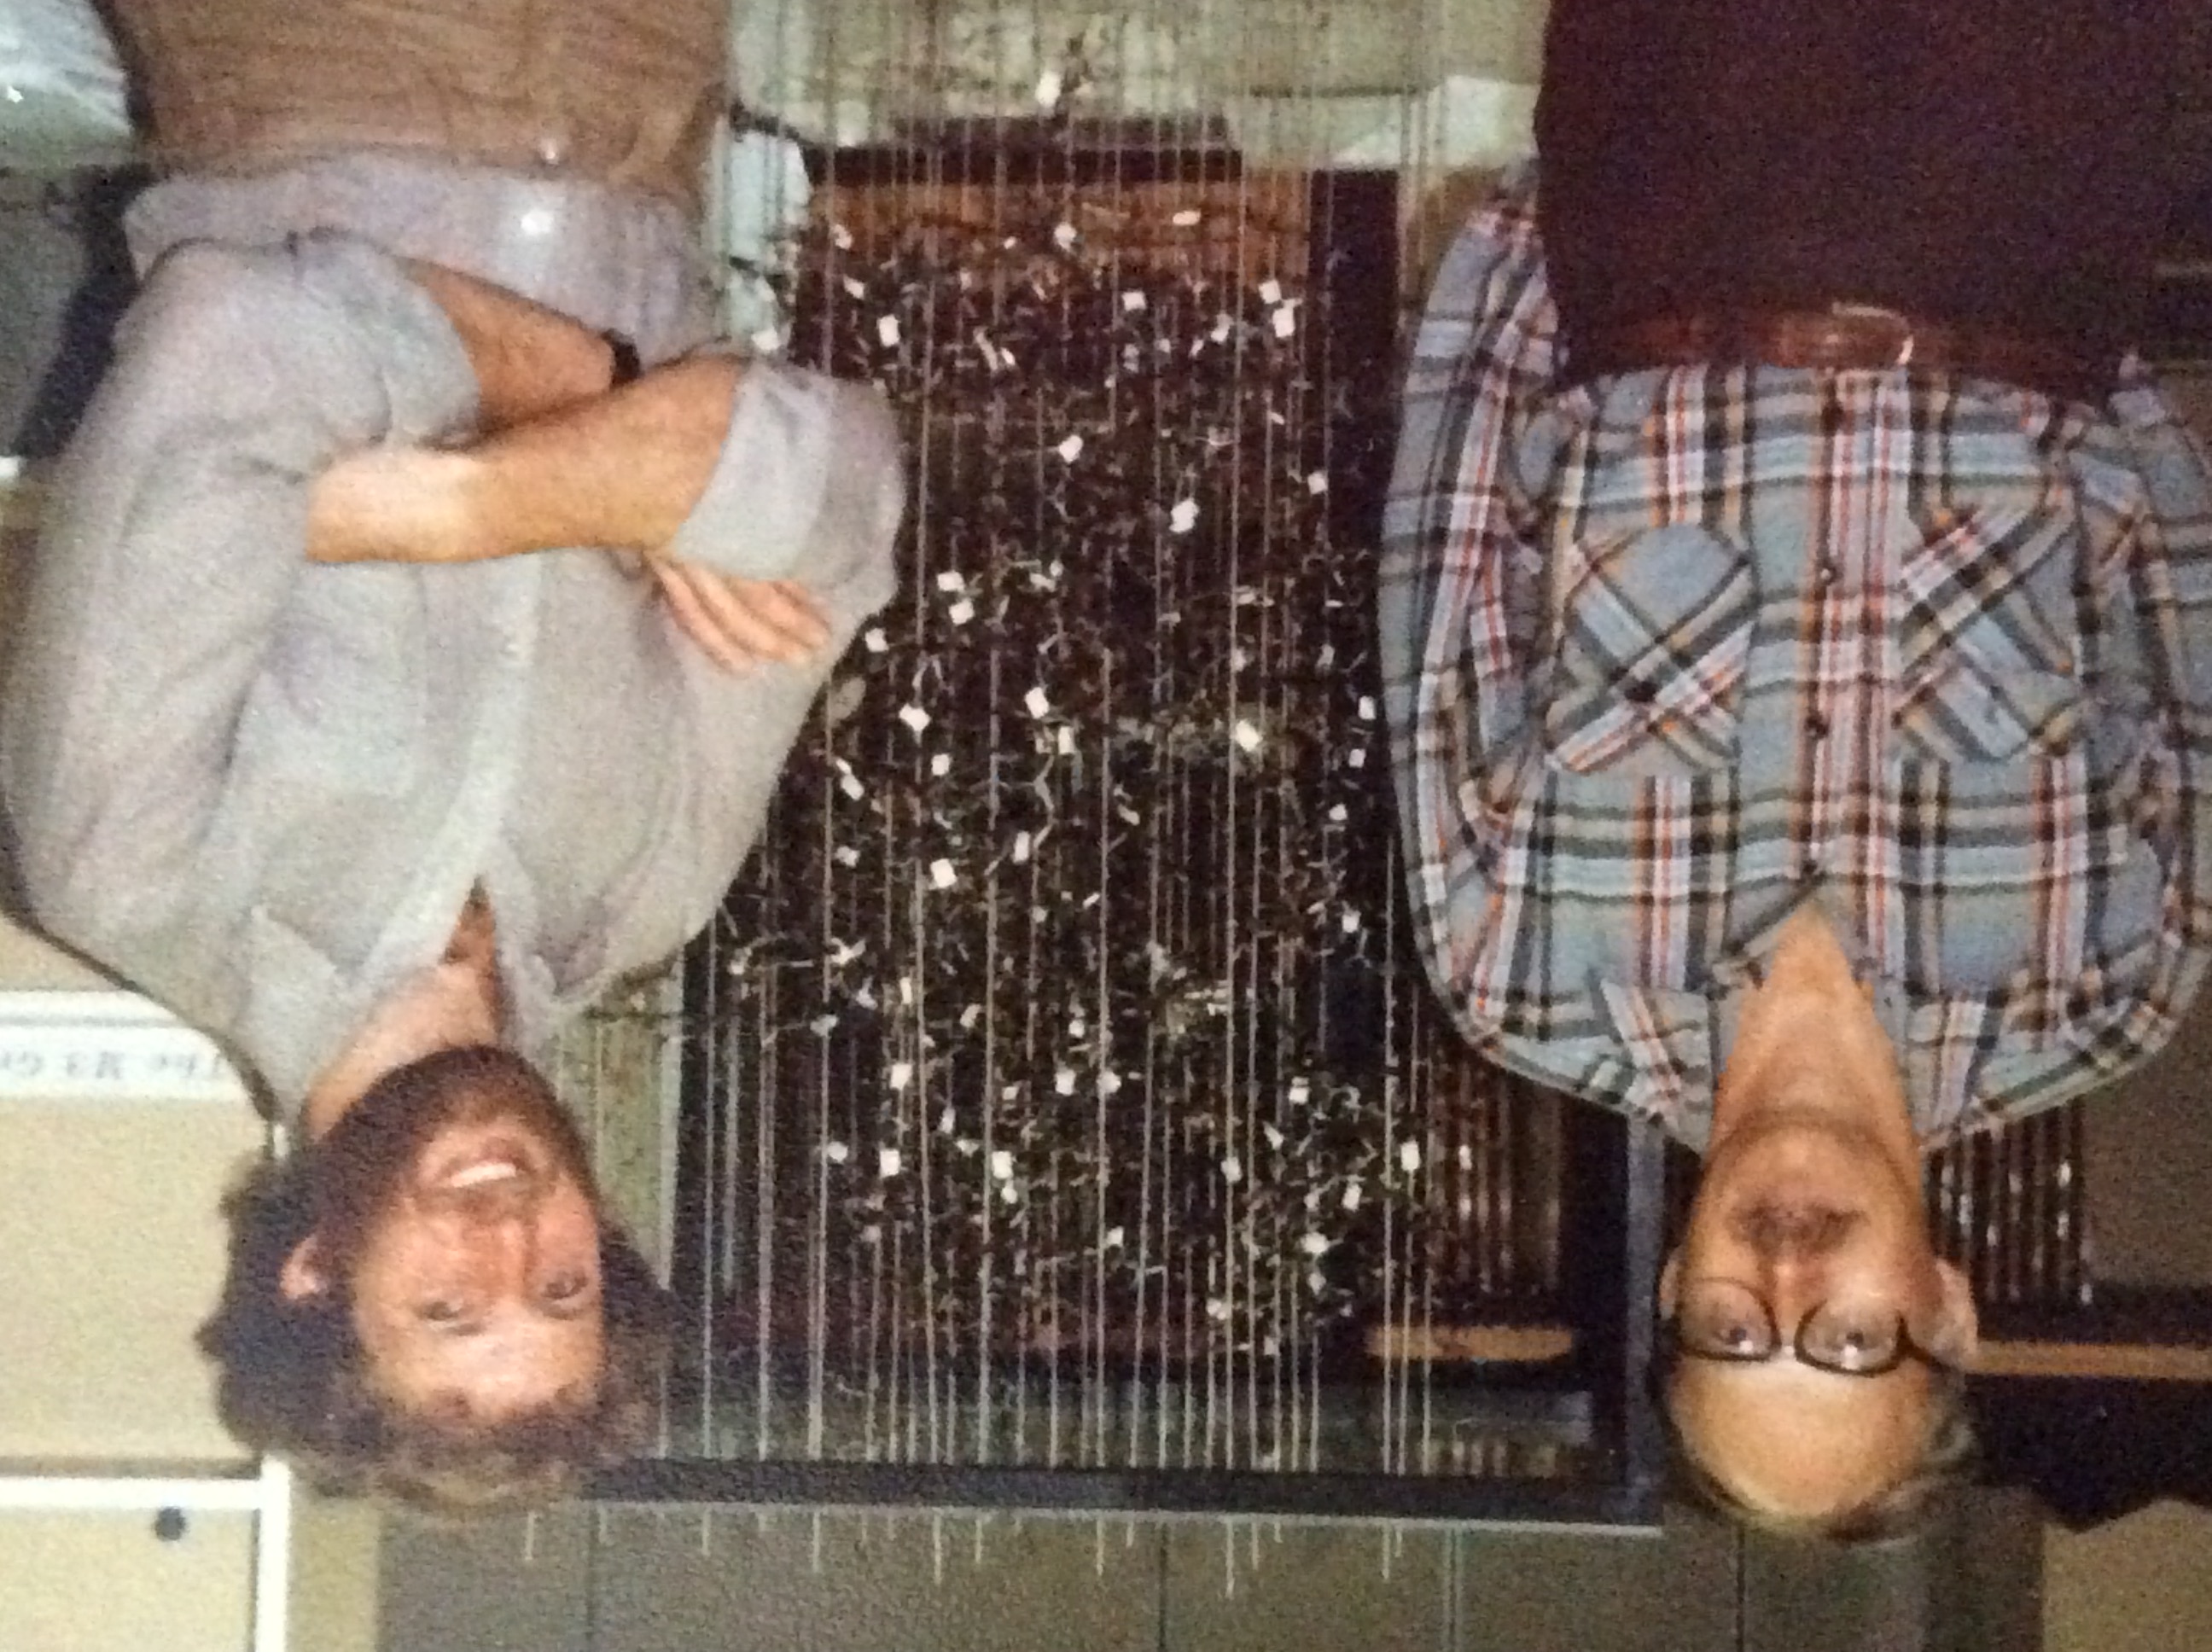 Neil Madsen and Steve Withers standing in front of a structure representing glycogen phosphorylase